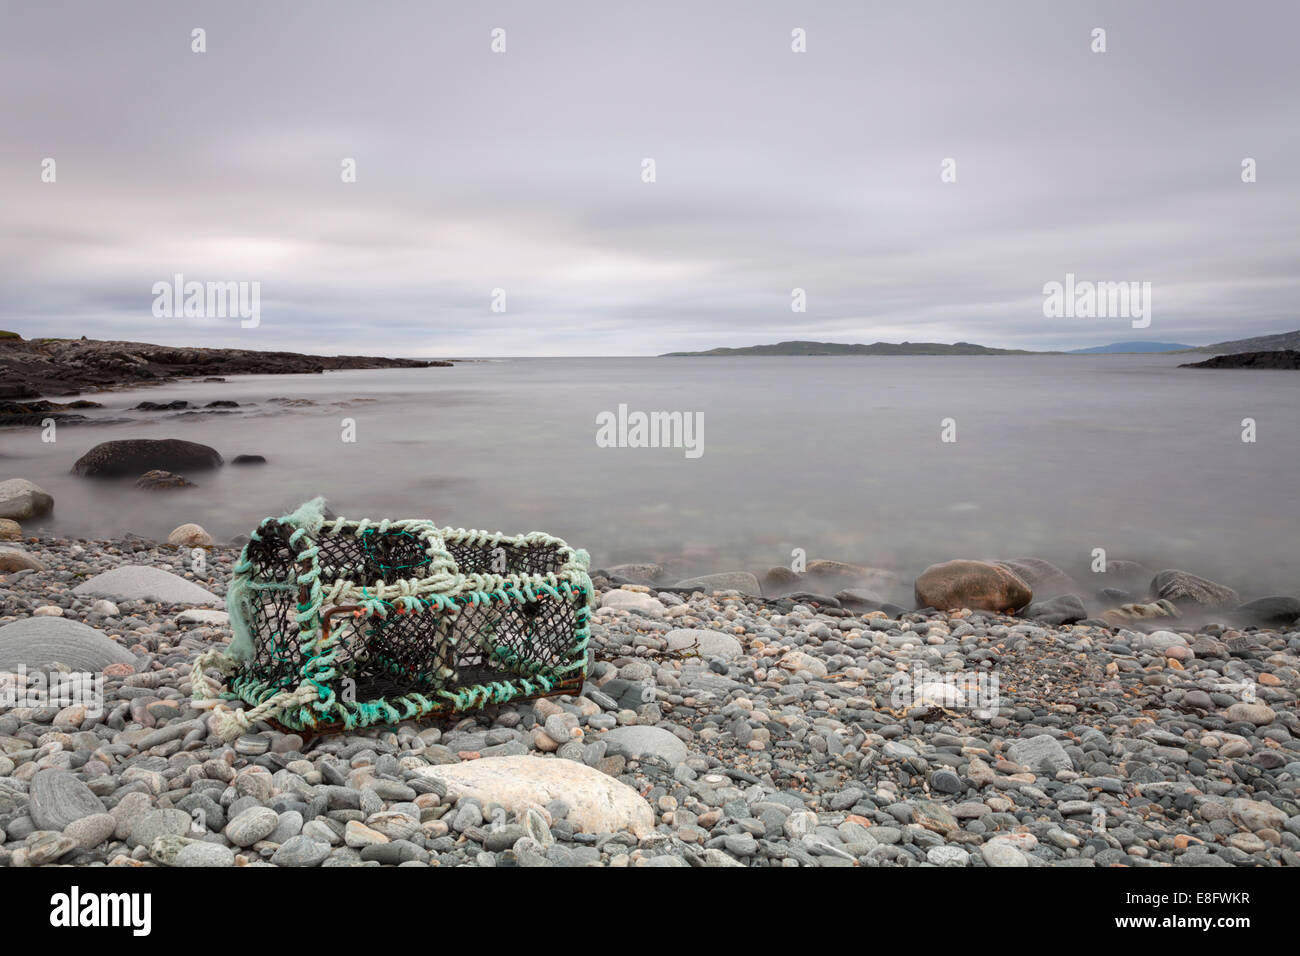 Lobster pot washed up on pebbly beach Isle of Harris, Scotalnd Stock Photo